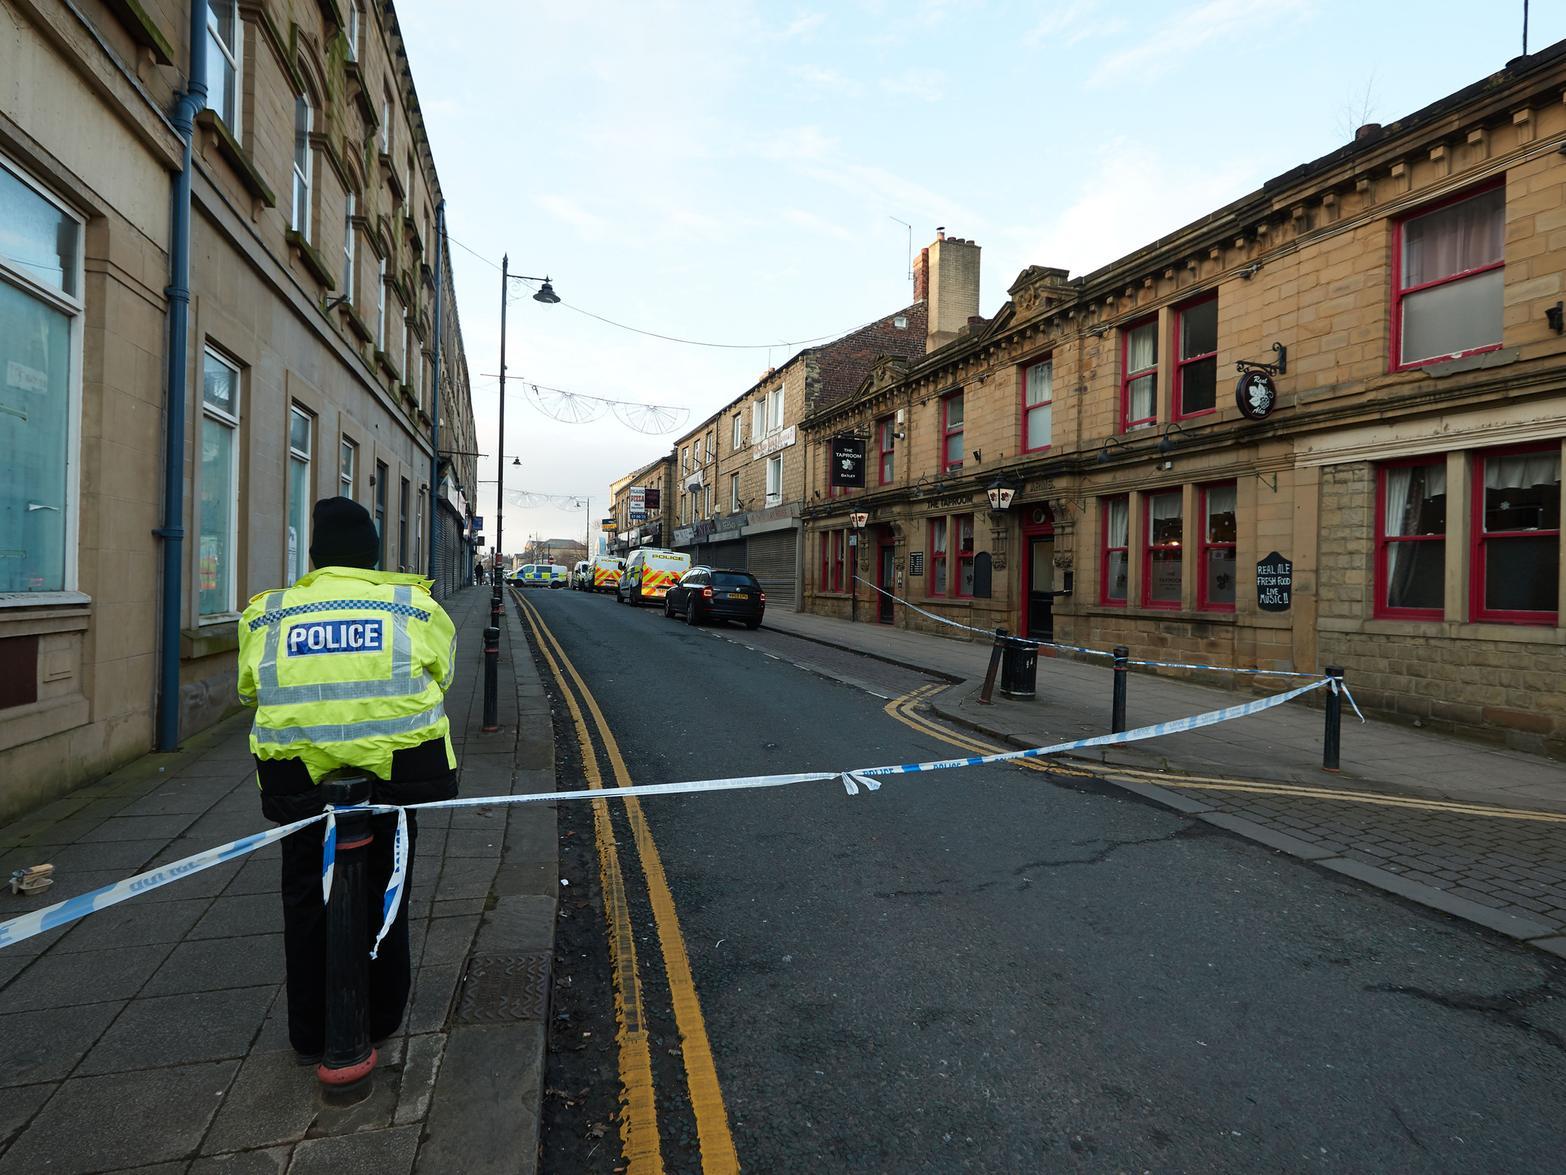 "The body, which is believed to be that of a man, was found inside the former bank premises in Commercial Street on Sunday, after officers forced entry to the building."